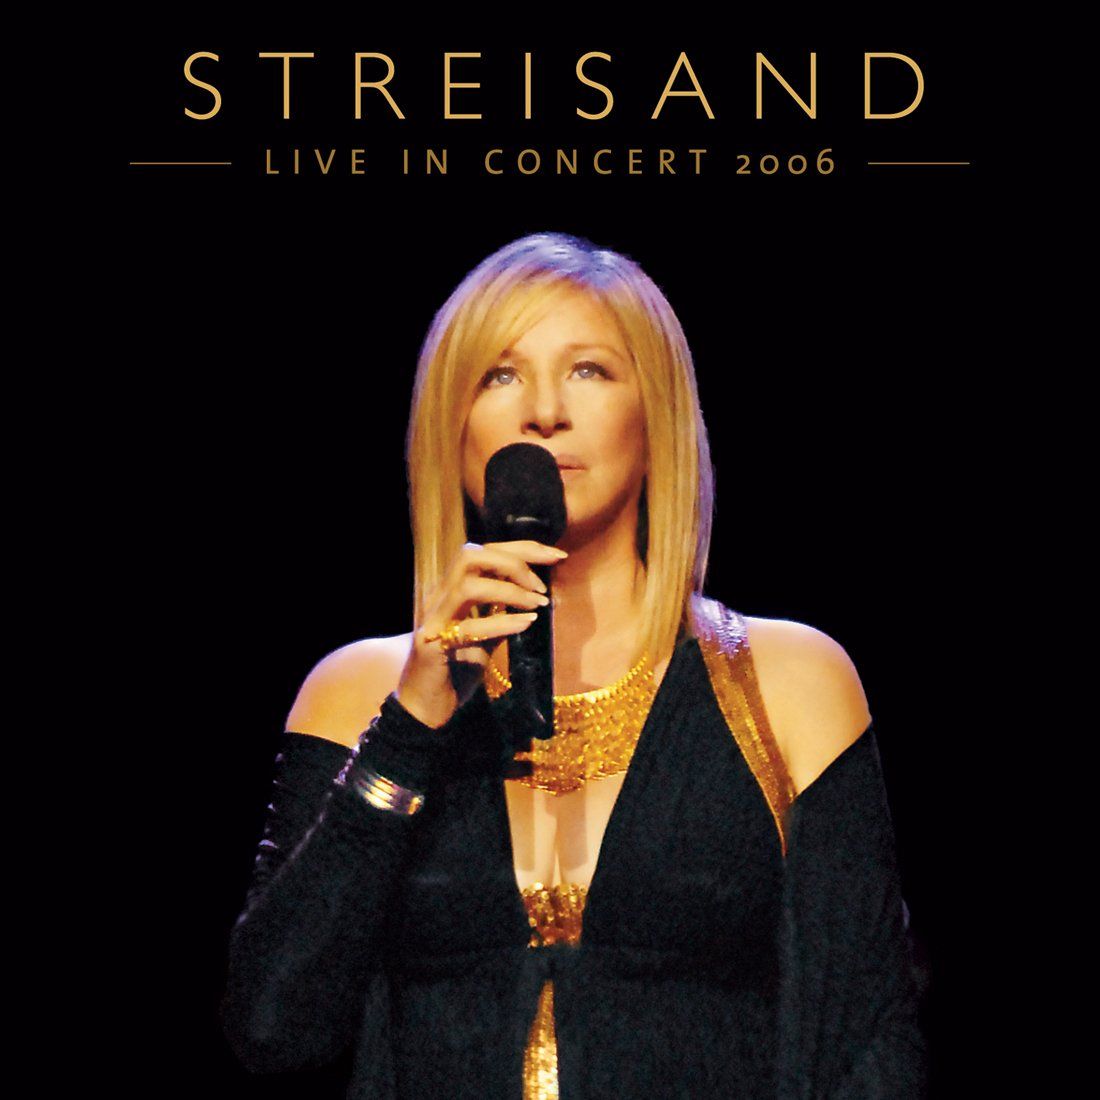 Cover of Streisand Live in Concert 2006, two CD set